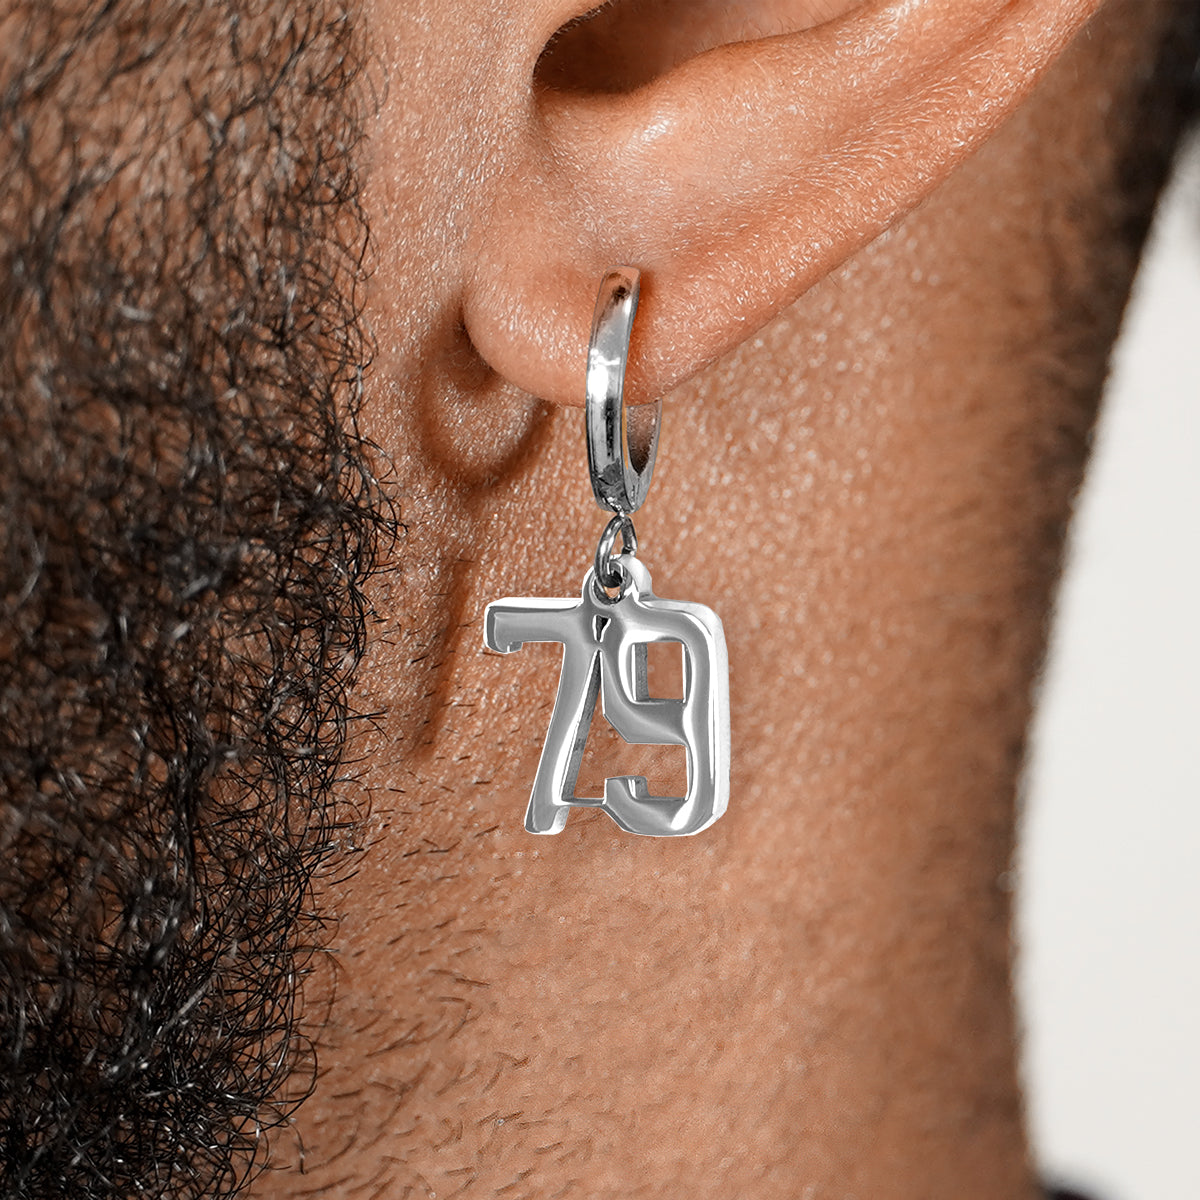 79 Number Earring - Stainless Steel